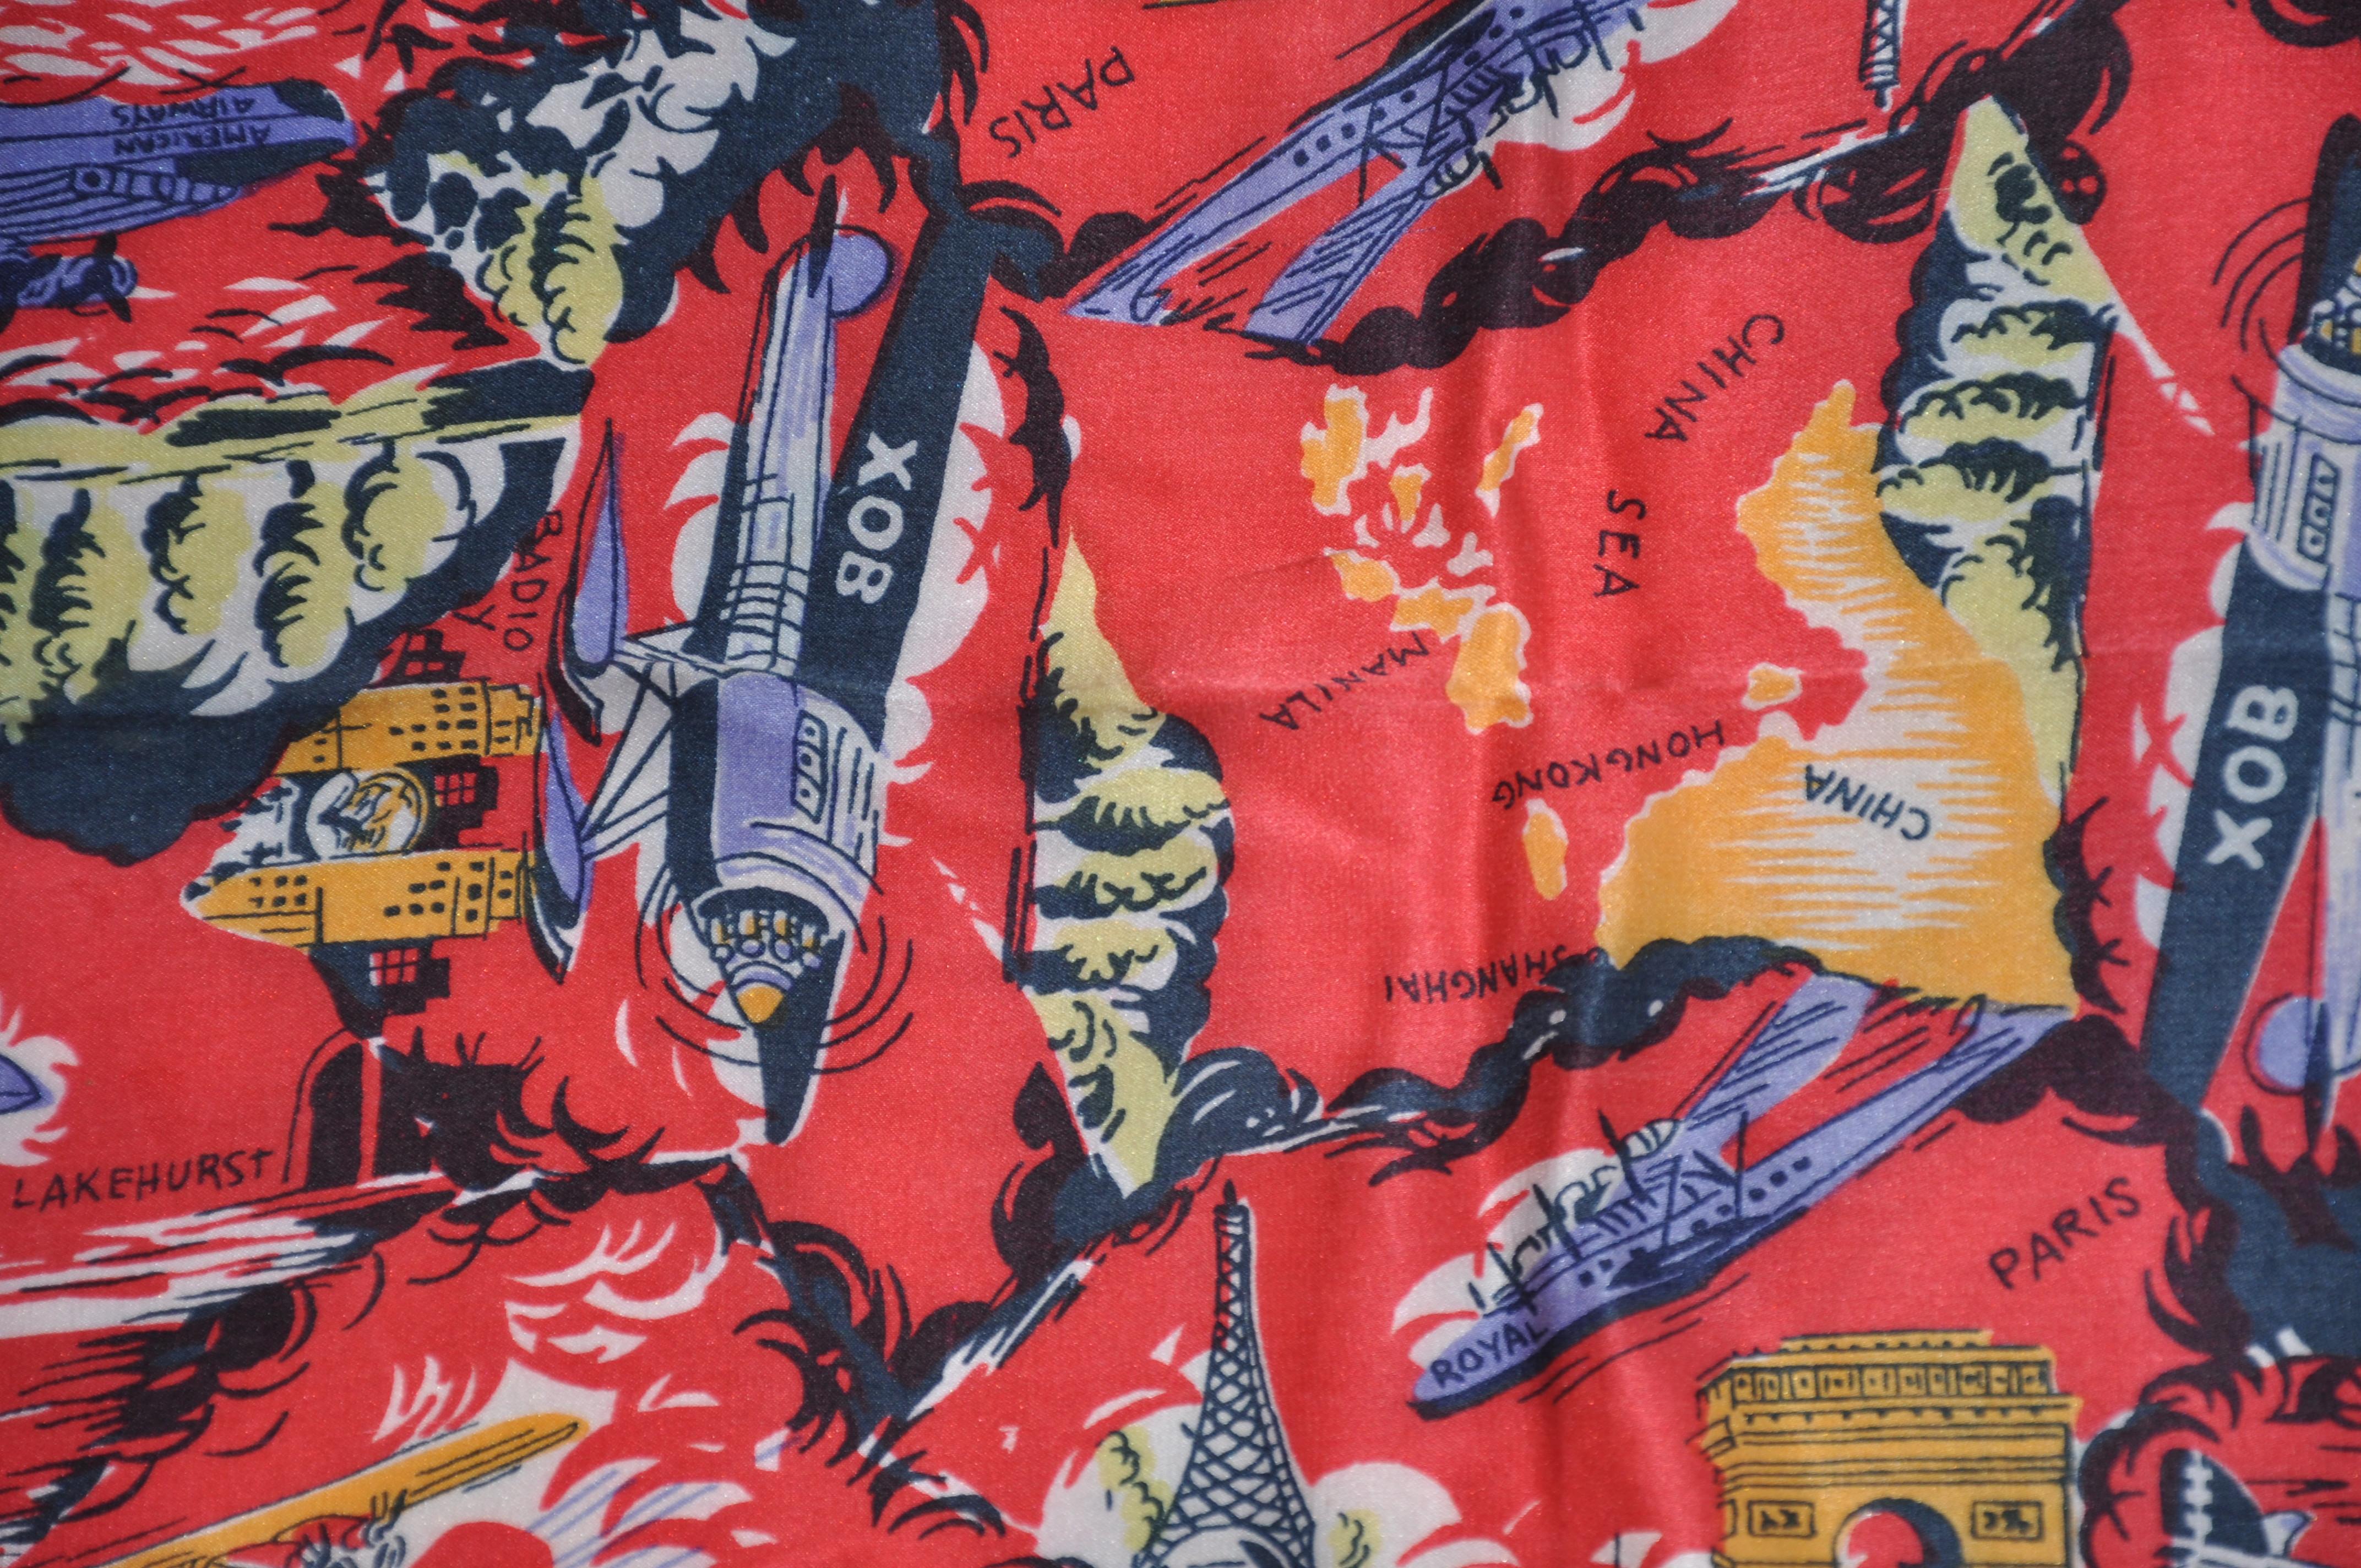     This wonderfully detailed silk scarf of Multi sizes and shapes of planes plus multi different locations of stops round the world measures 20 inches by 20 inches accented with rolled edges. Made in Japan.